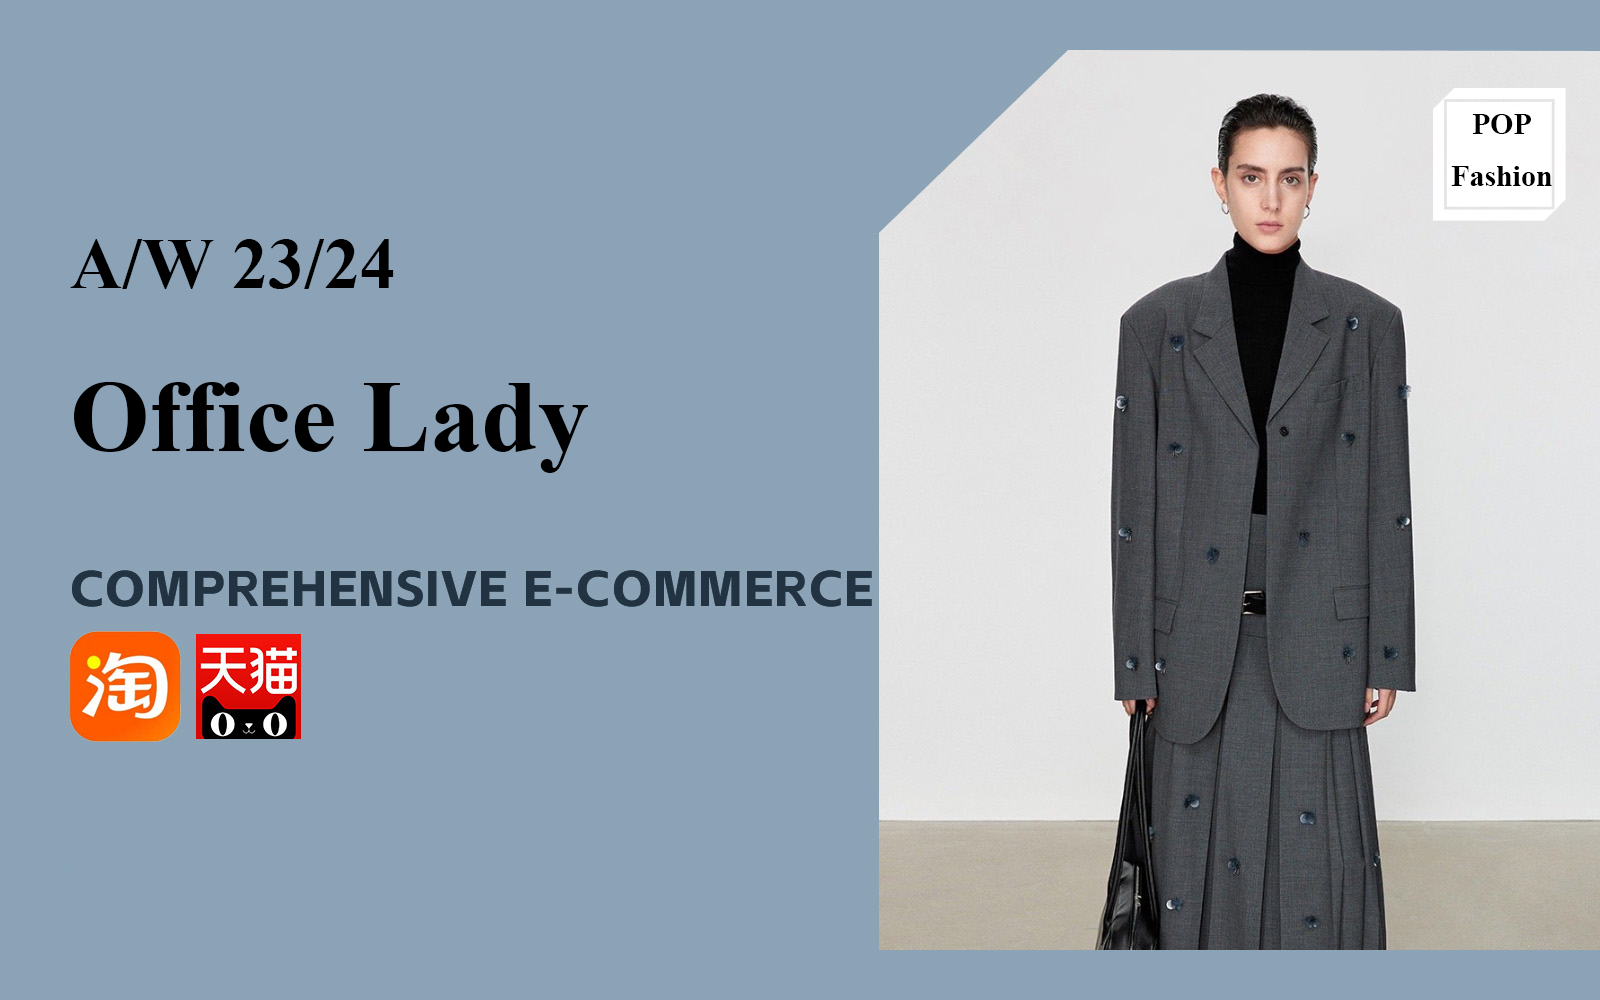 Office Lady -- The Popular Style of Womenswear E-Commerce Brands